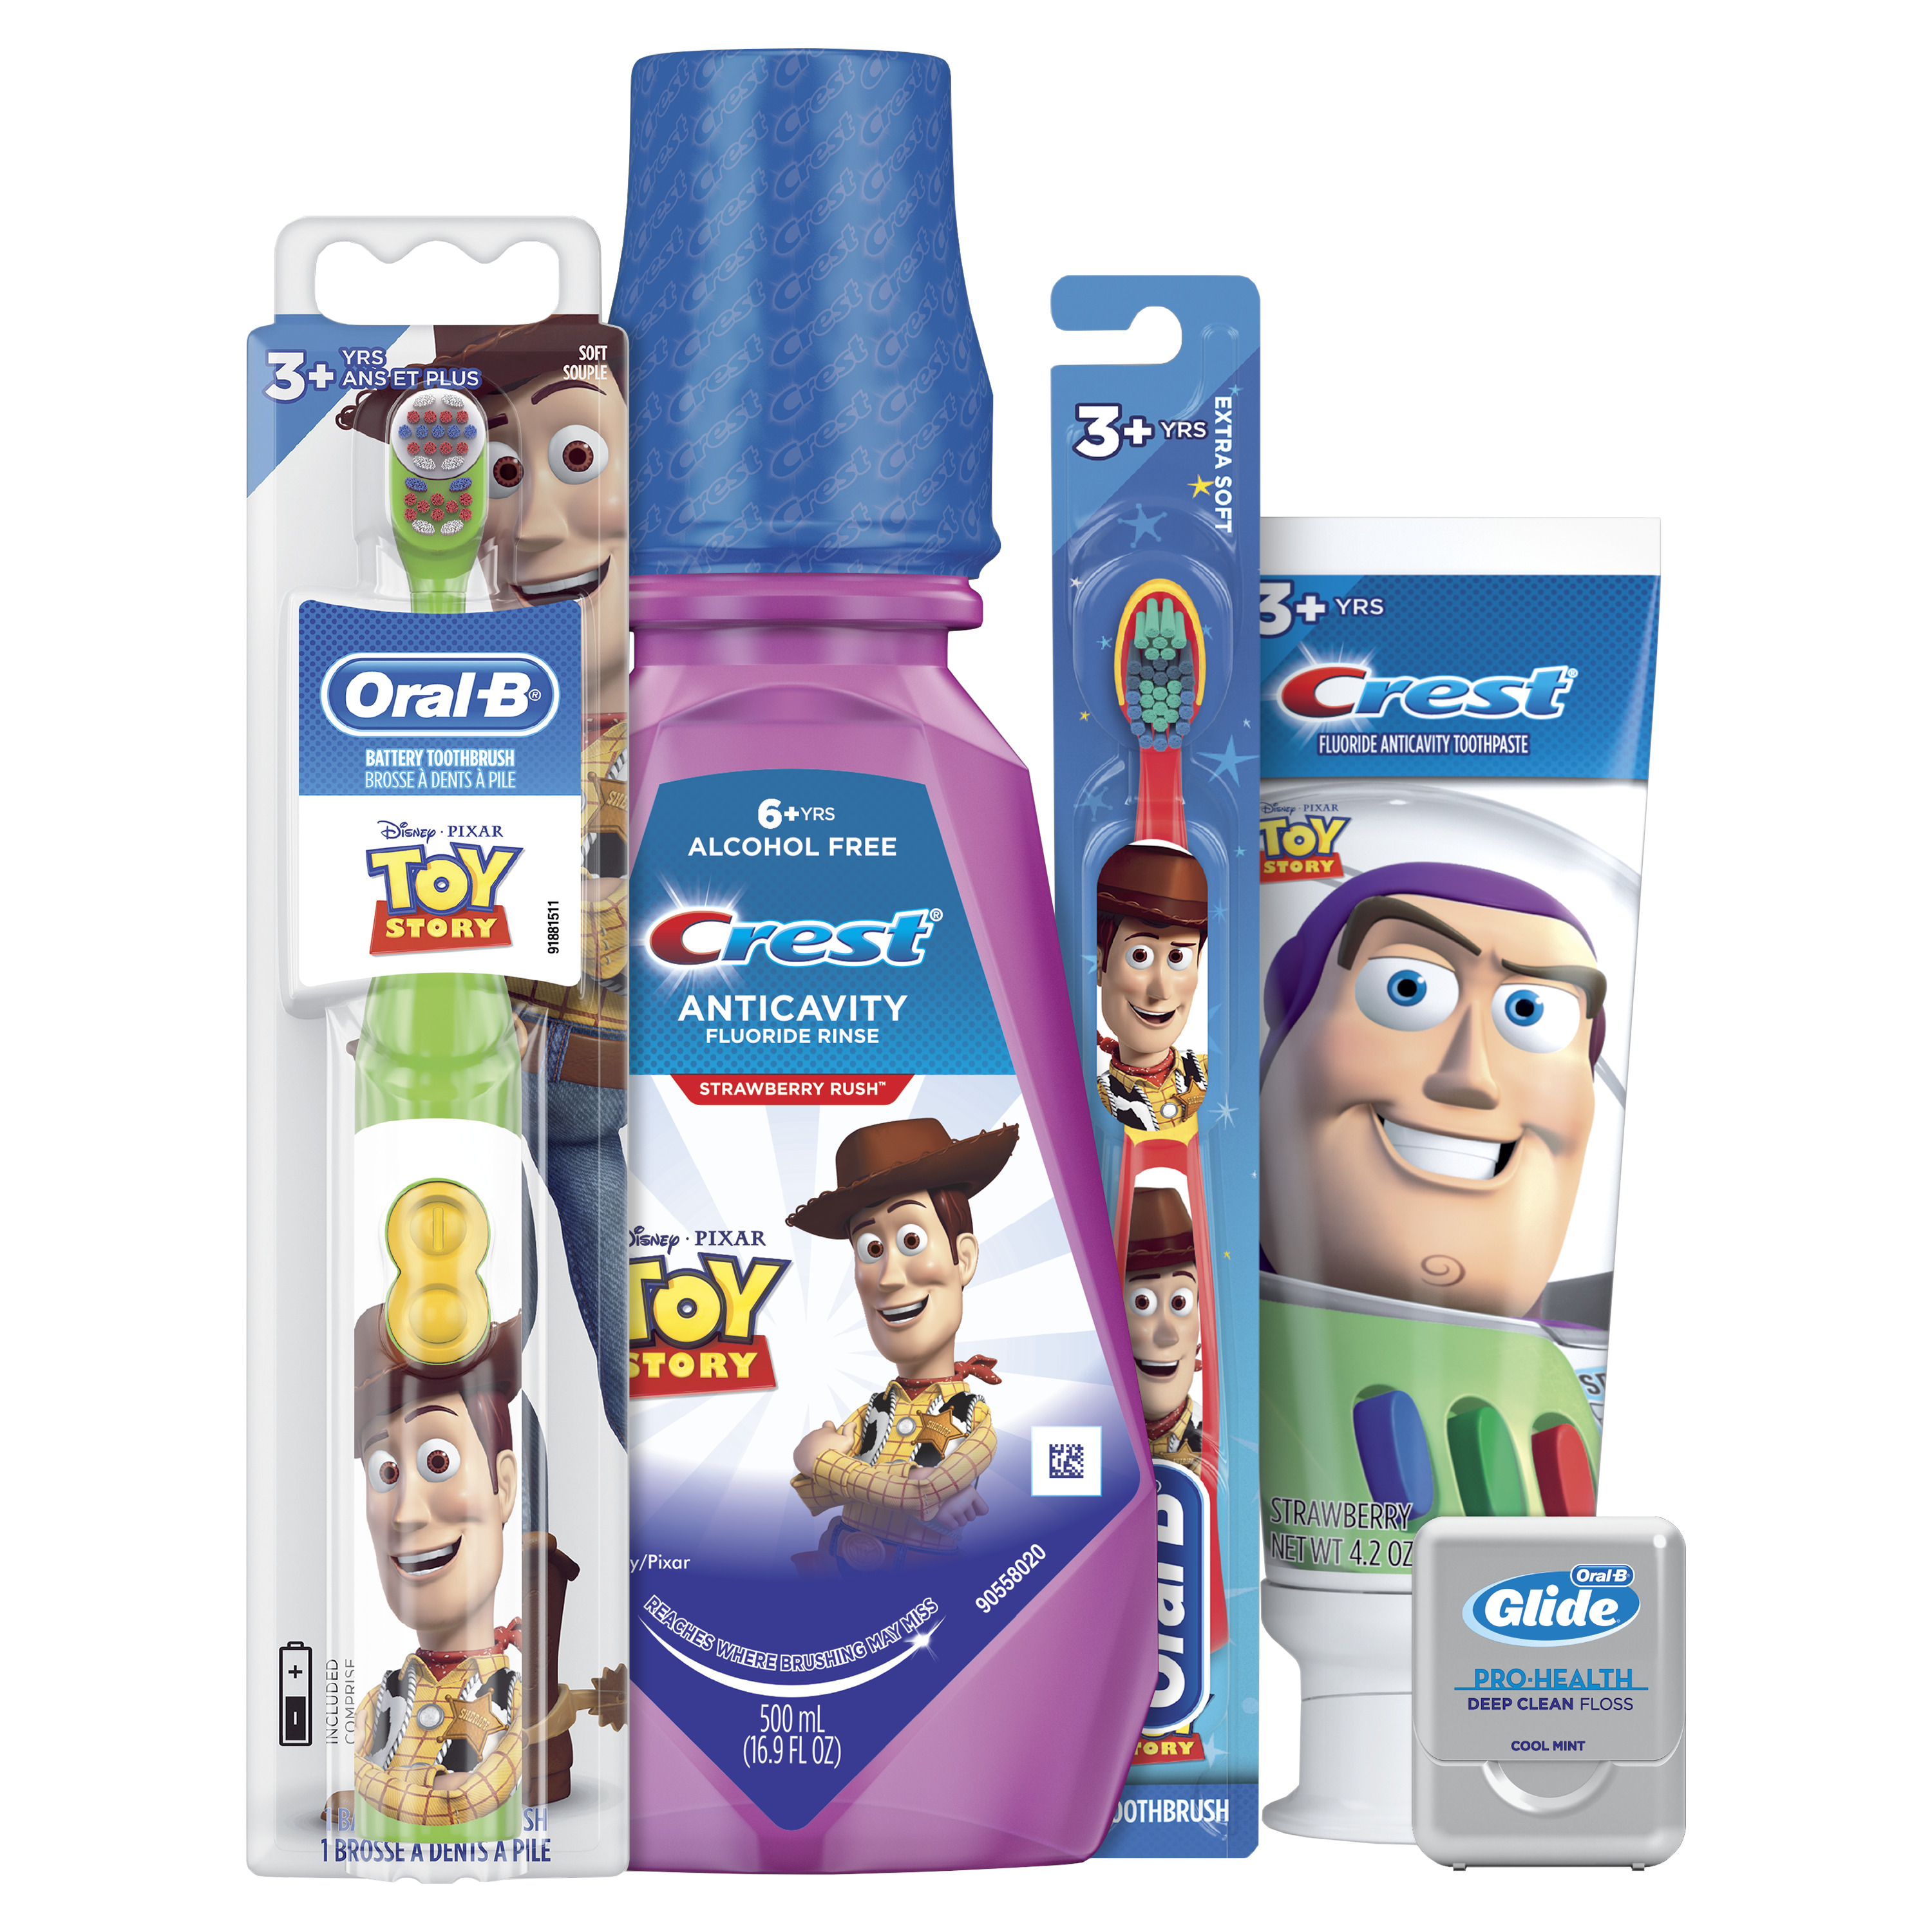 Crest & Oral-B Kids Disney Pixar Toy Story Gift Pack with Power and Manual Toothbrushes, 4.2 Oz Toothpaste, 16.9 Fl Oz Mouthwash and Floss - image 4 of 12